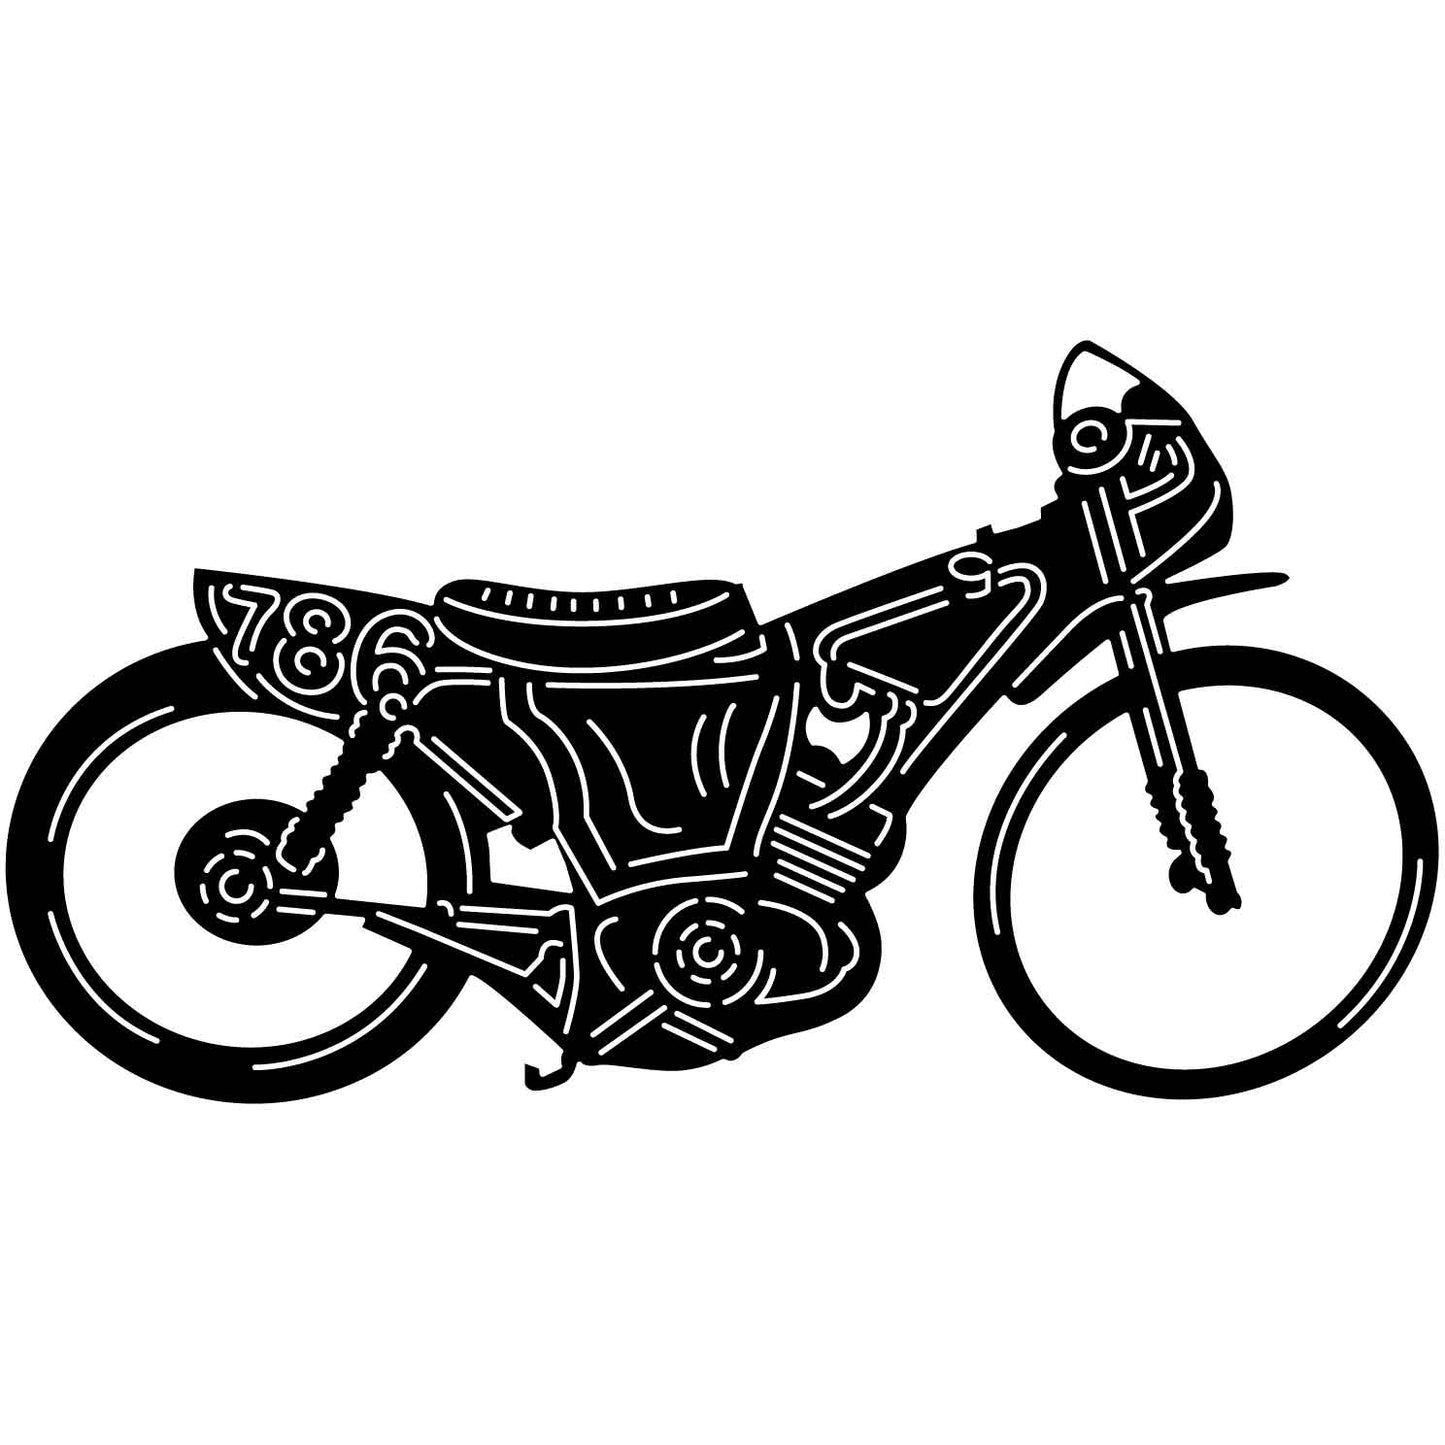 Old Motorcycle-DXF files cut ready for cnc machines-DXFforCNC.com